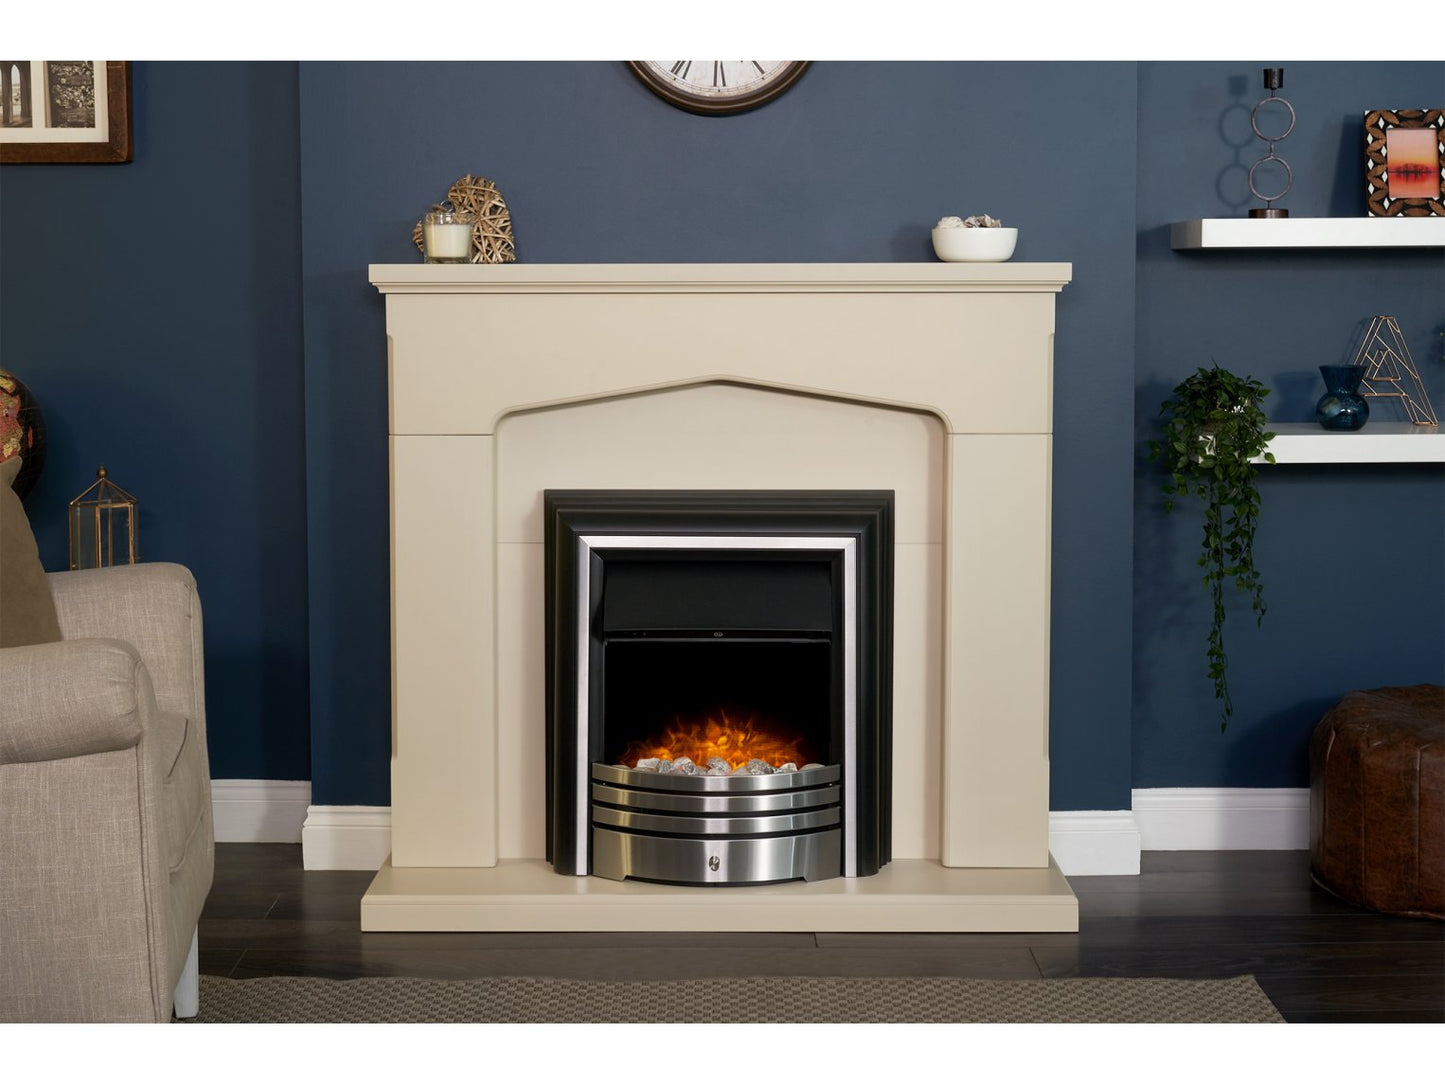 Adam Cotswold Fireplace Stone Effect + York Freestanding Electric Fire Brushed Steel, 48"